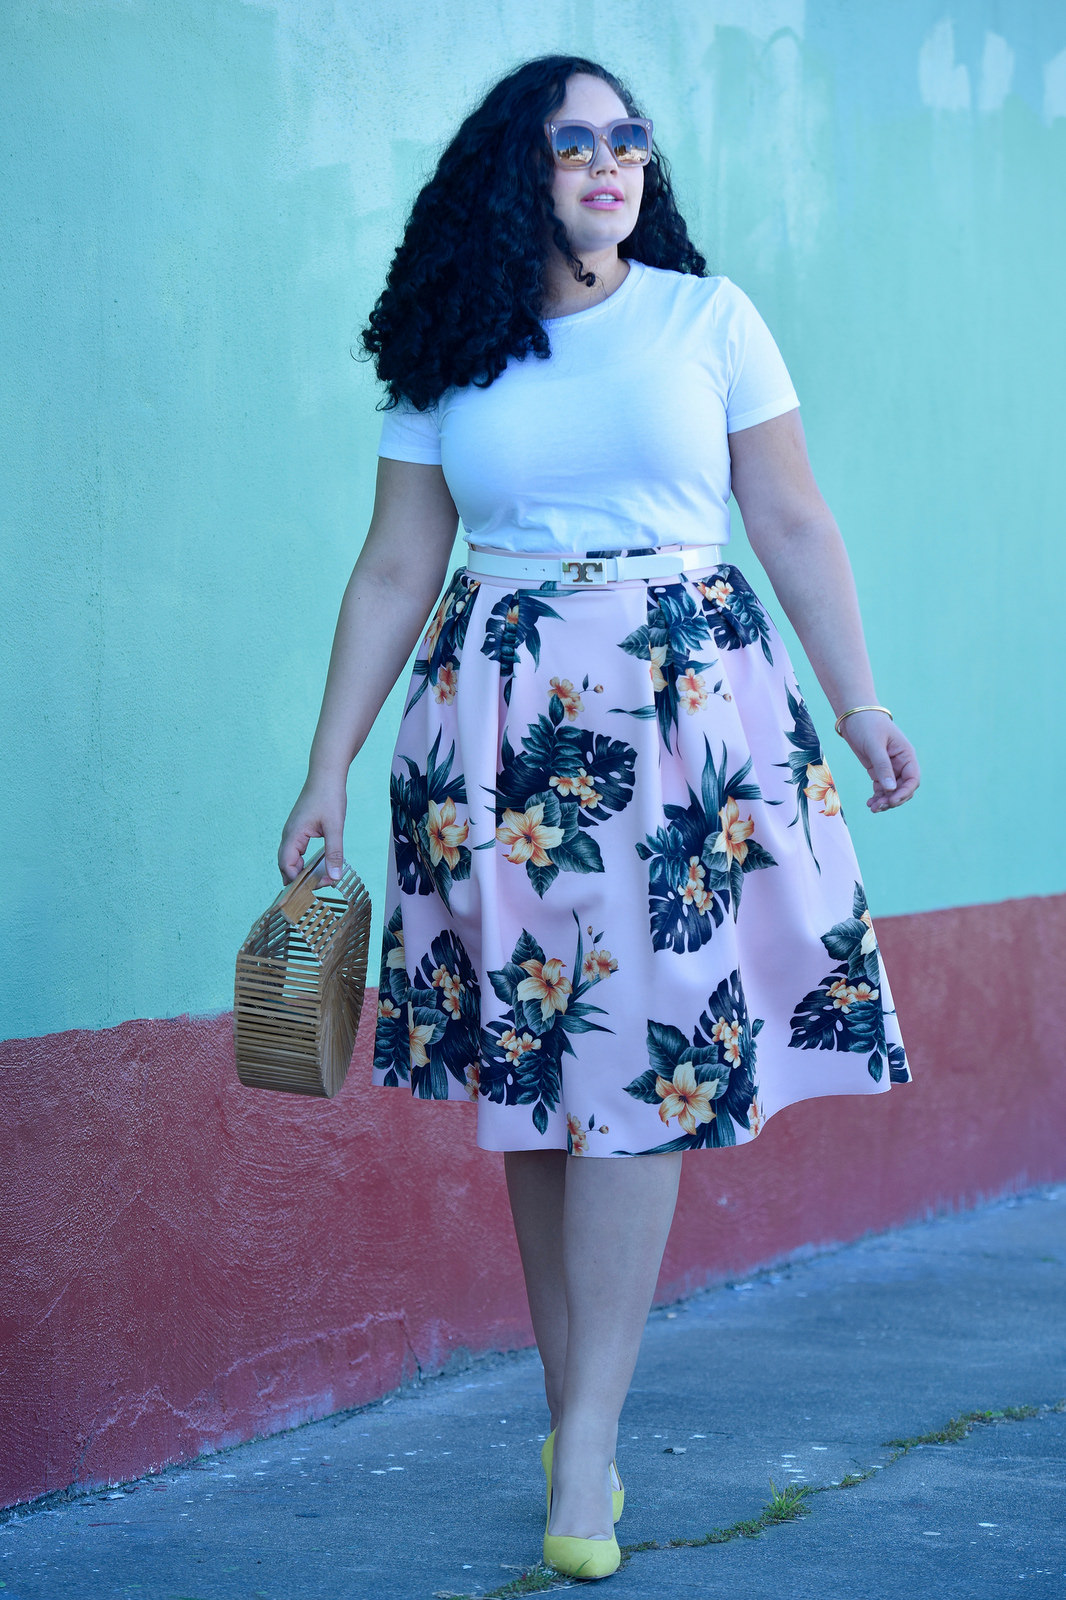 How to Wear Tropical Print When You Aren’t on Vacation via @GirlwithCurves